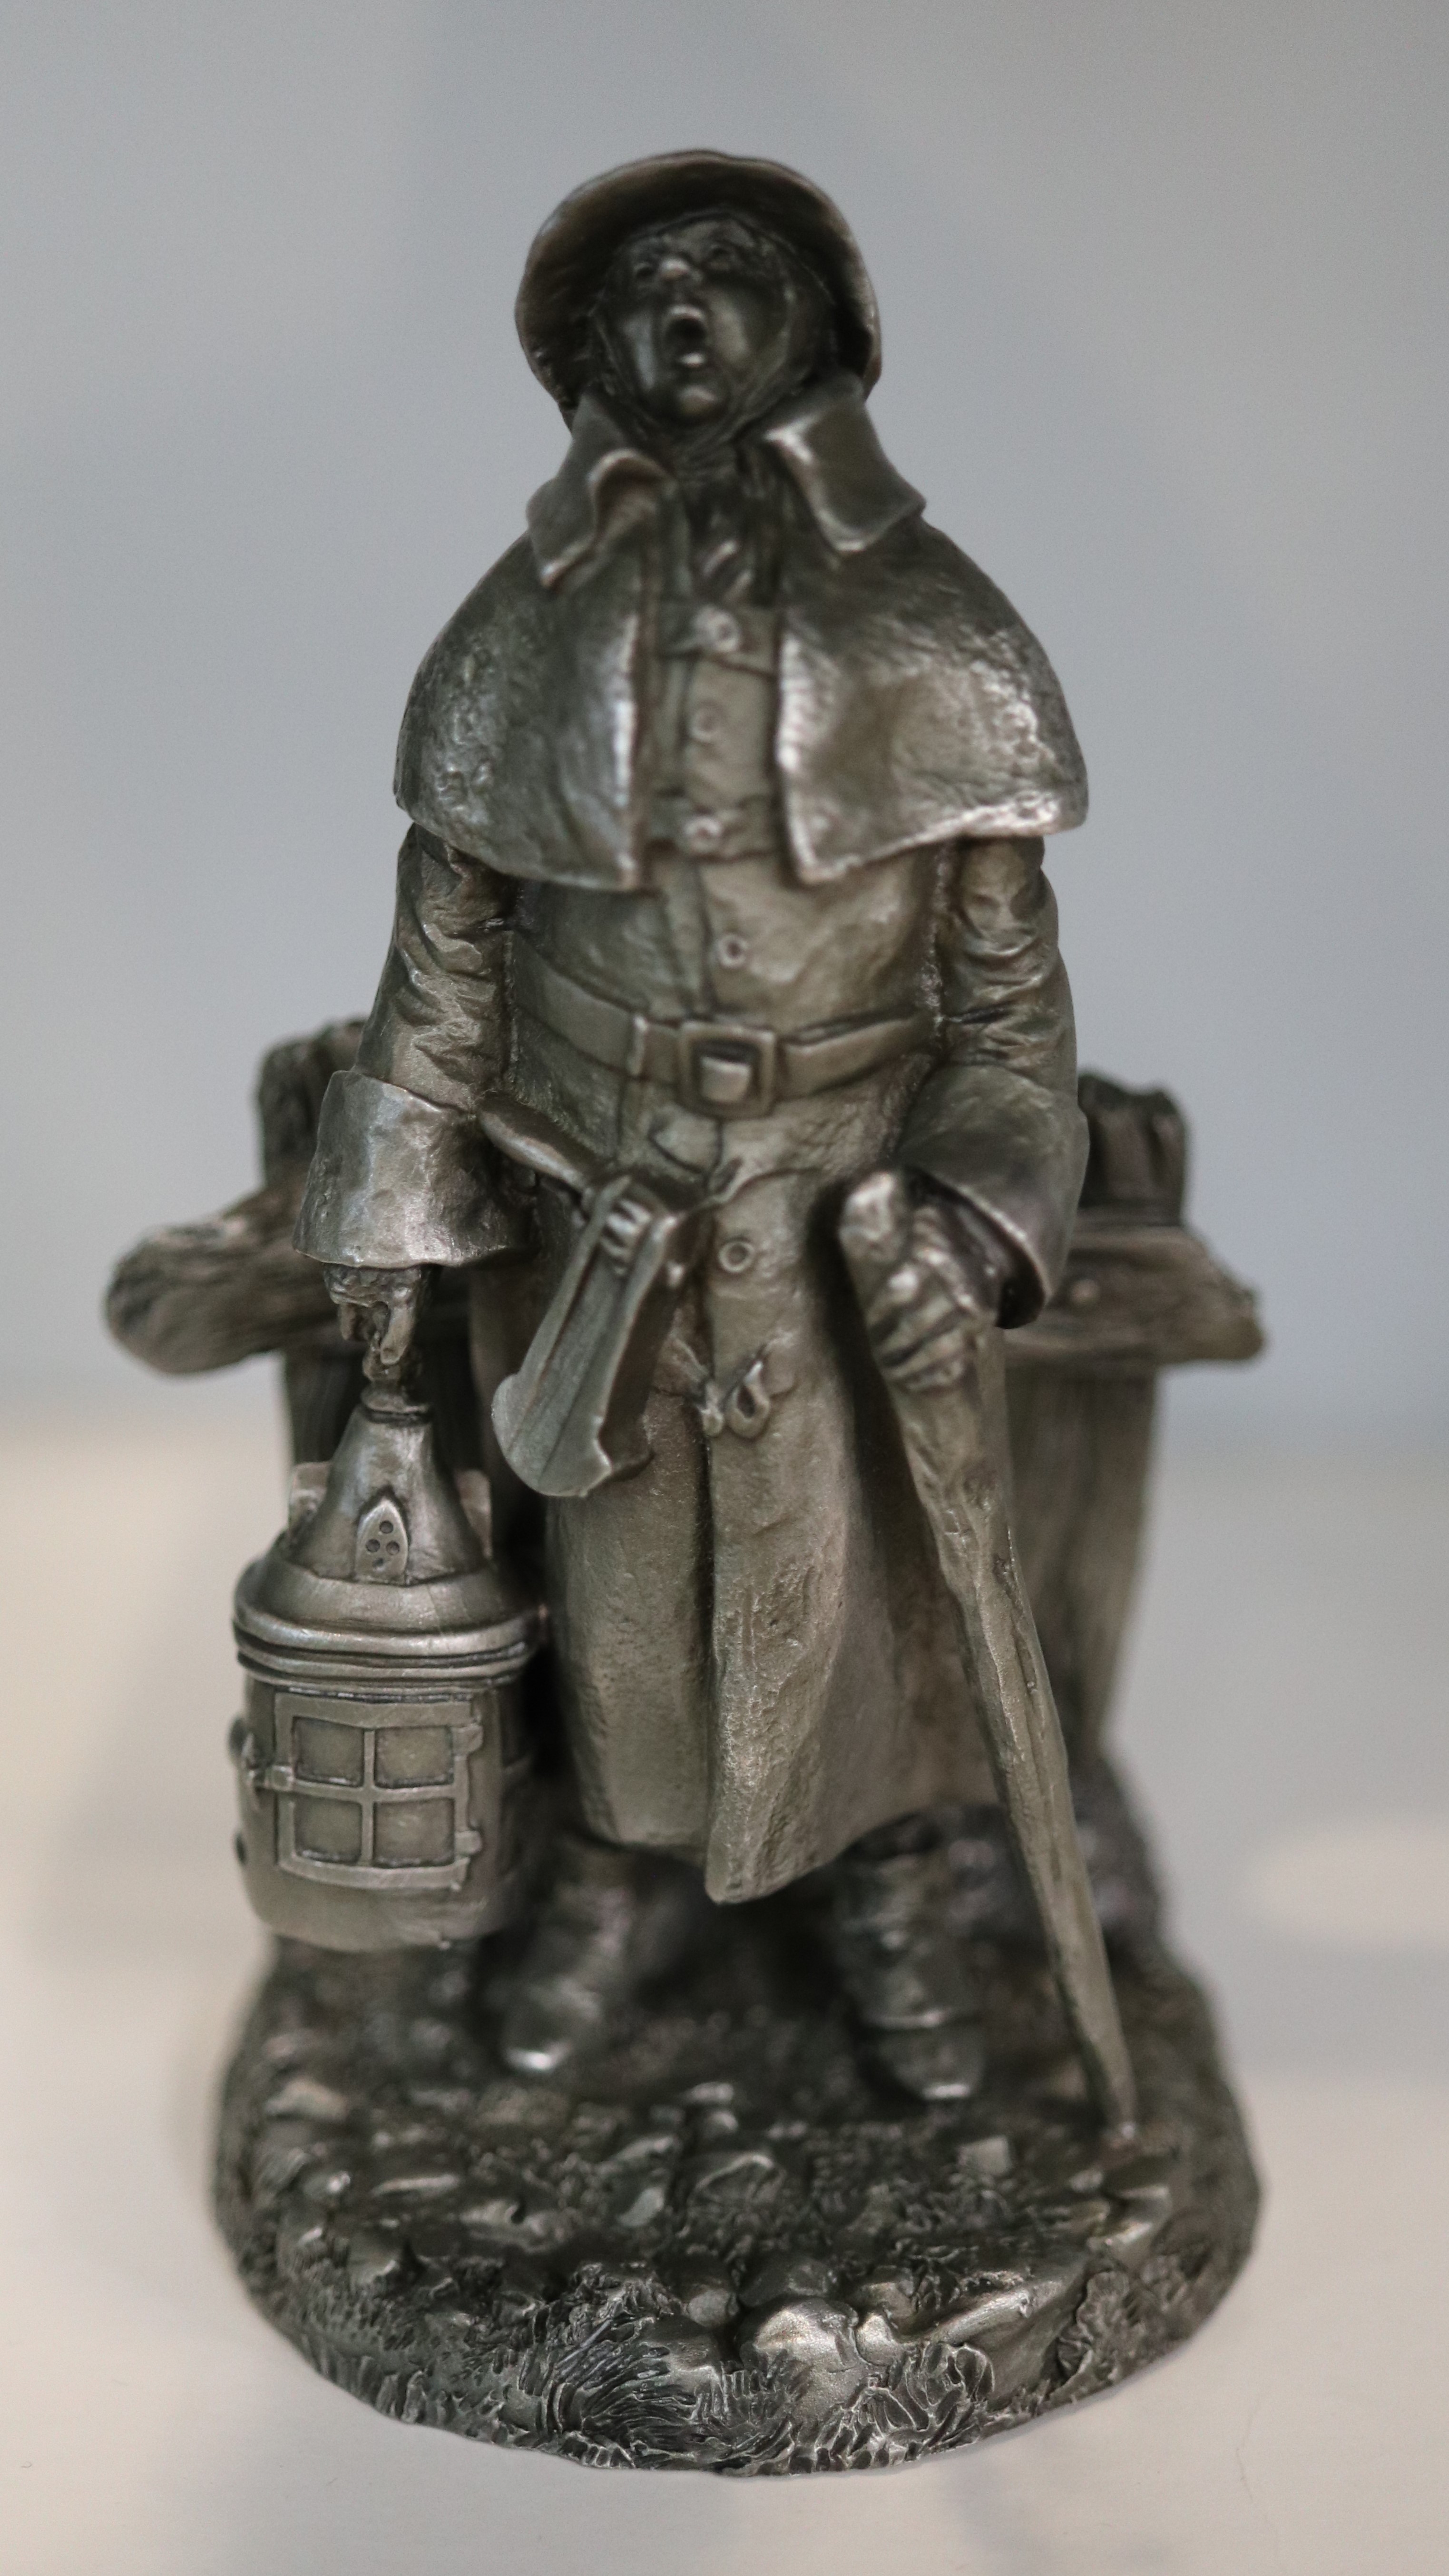 Complete collection of pewter figurines the Cries of London in original boxes - Image 2 of 13